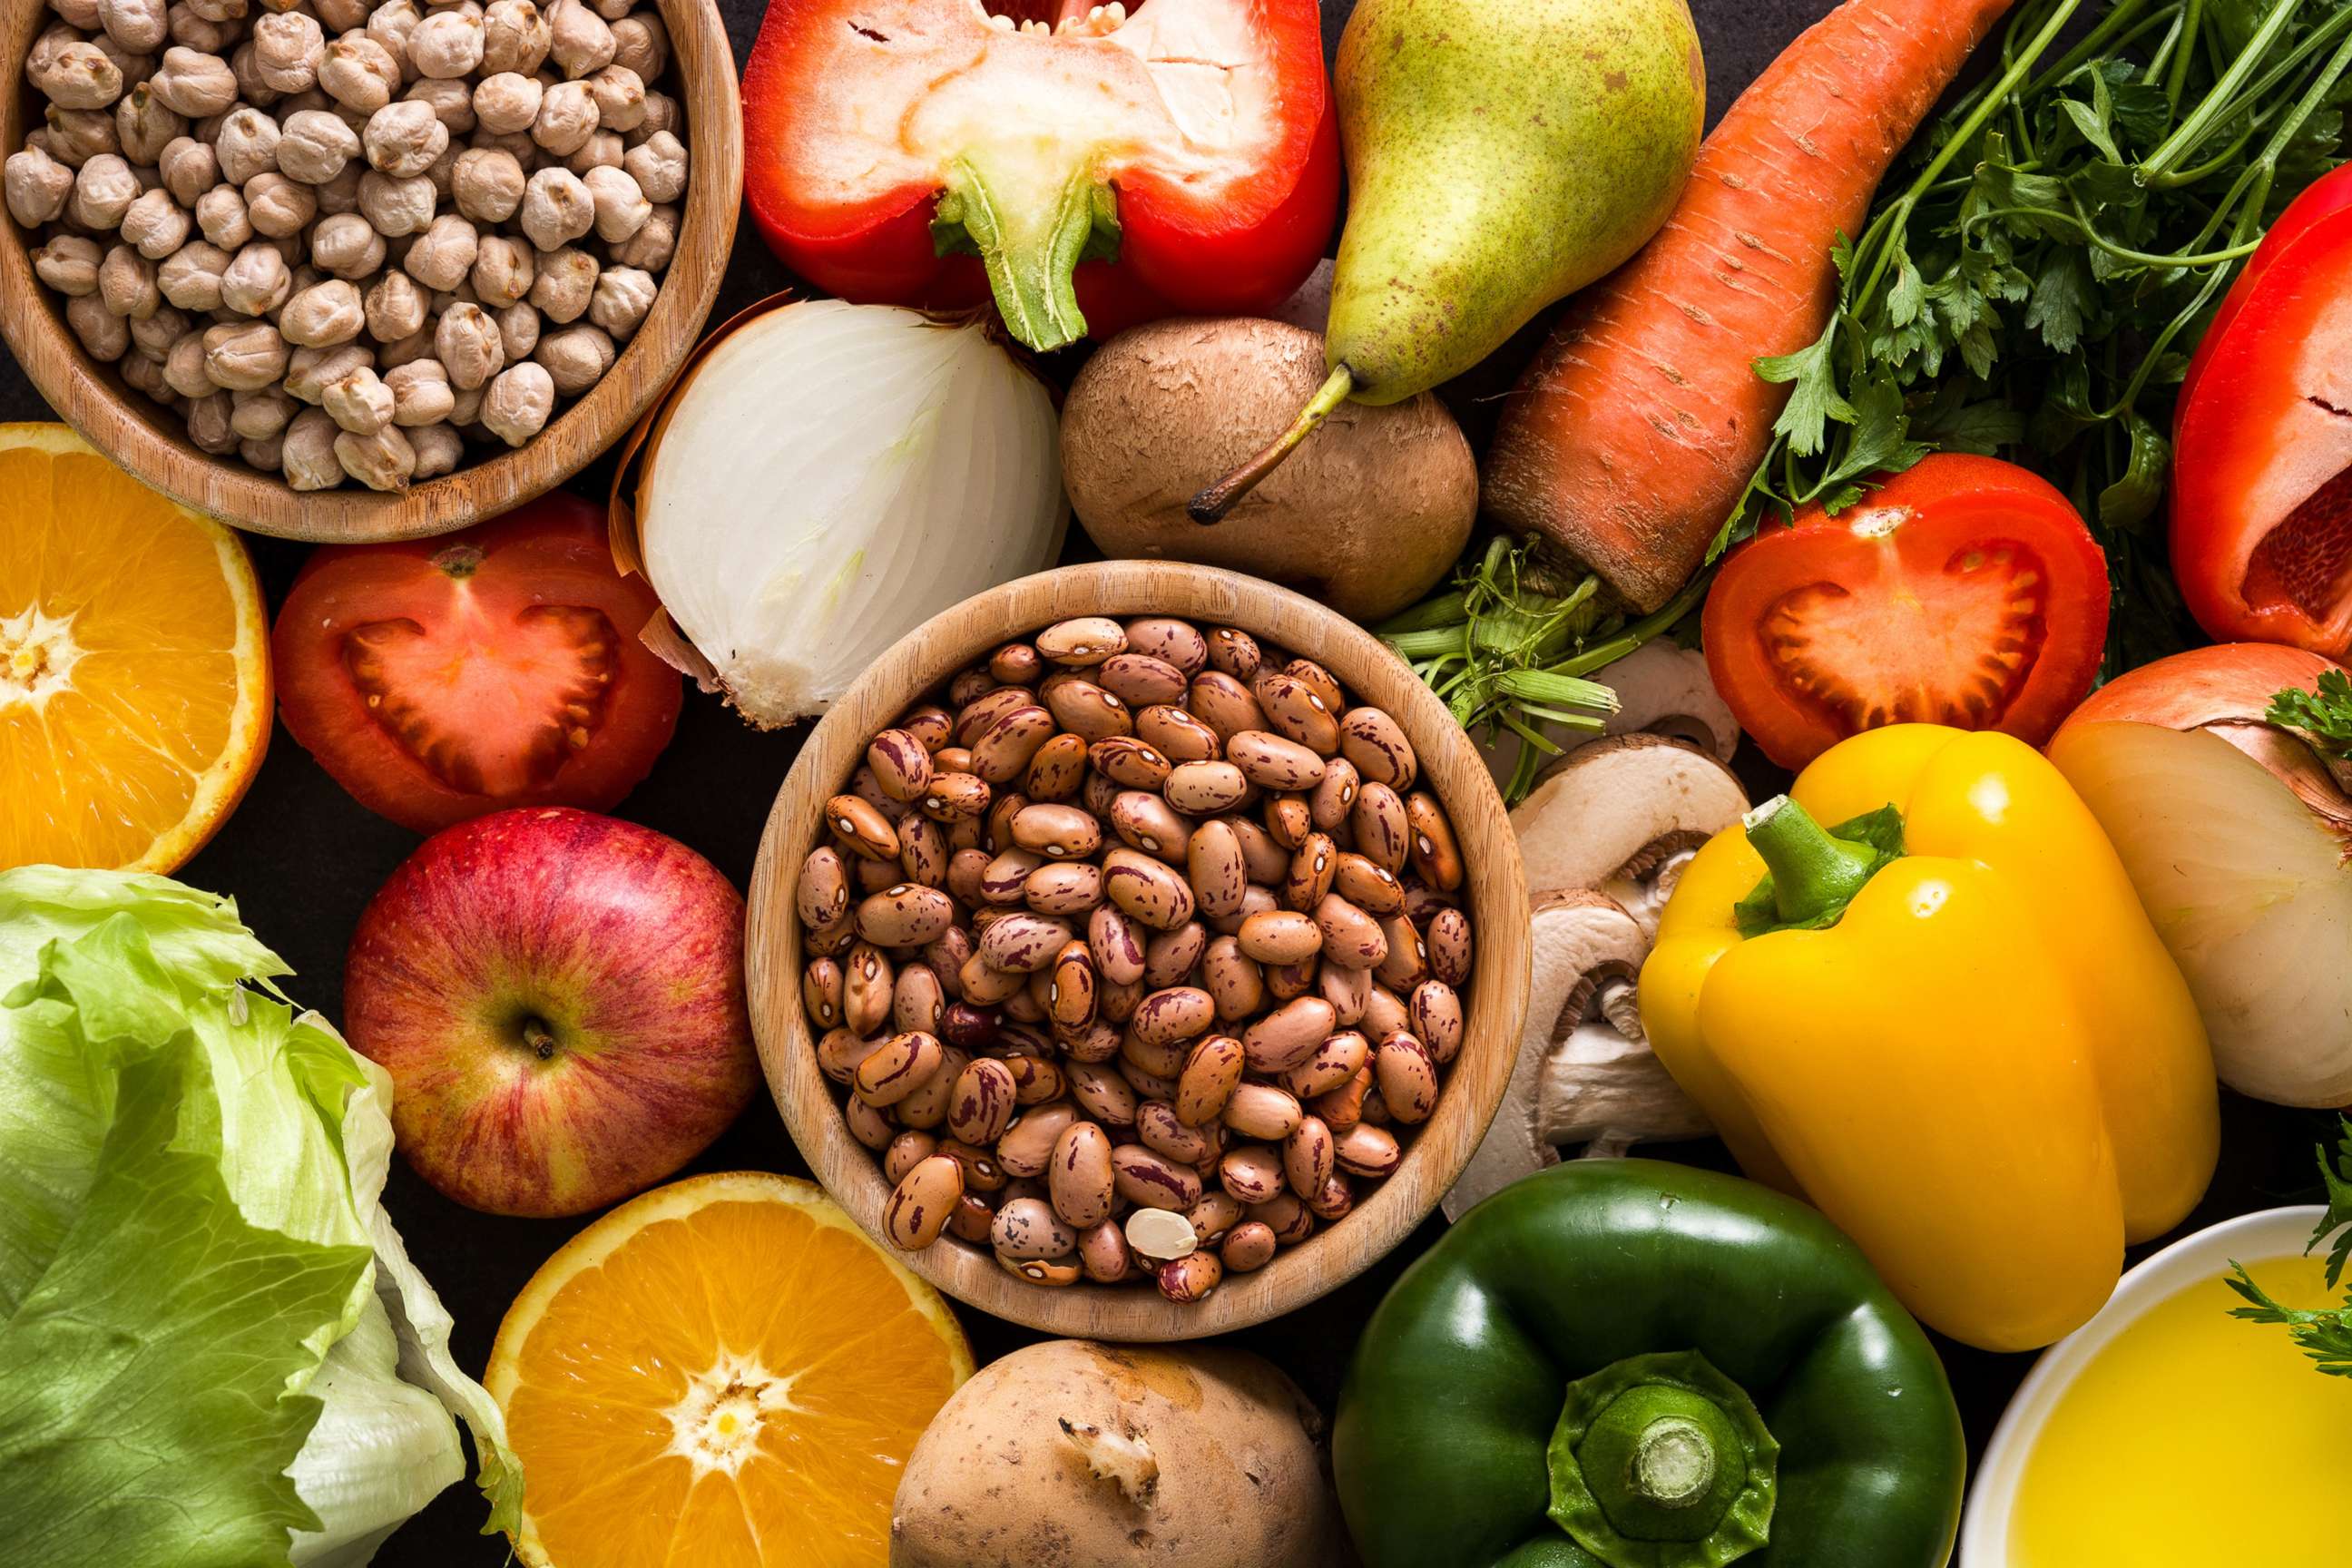 PHOTO: Fruits, vegetables, legumes, and whole grains.